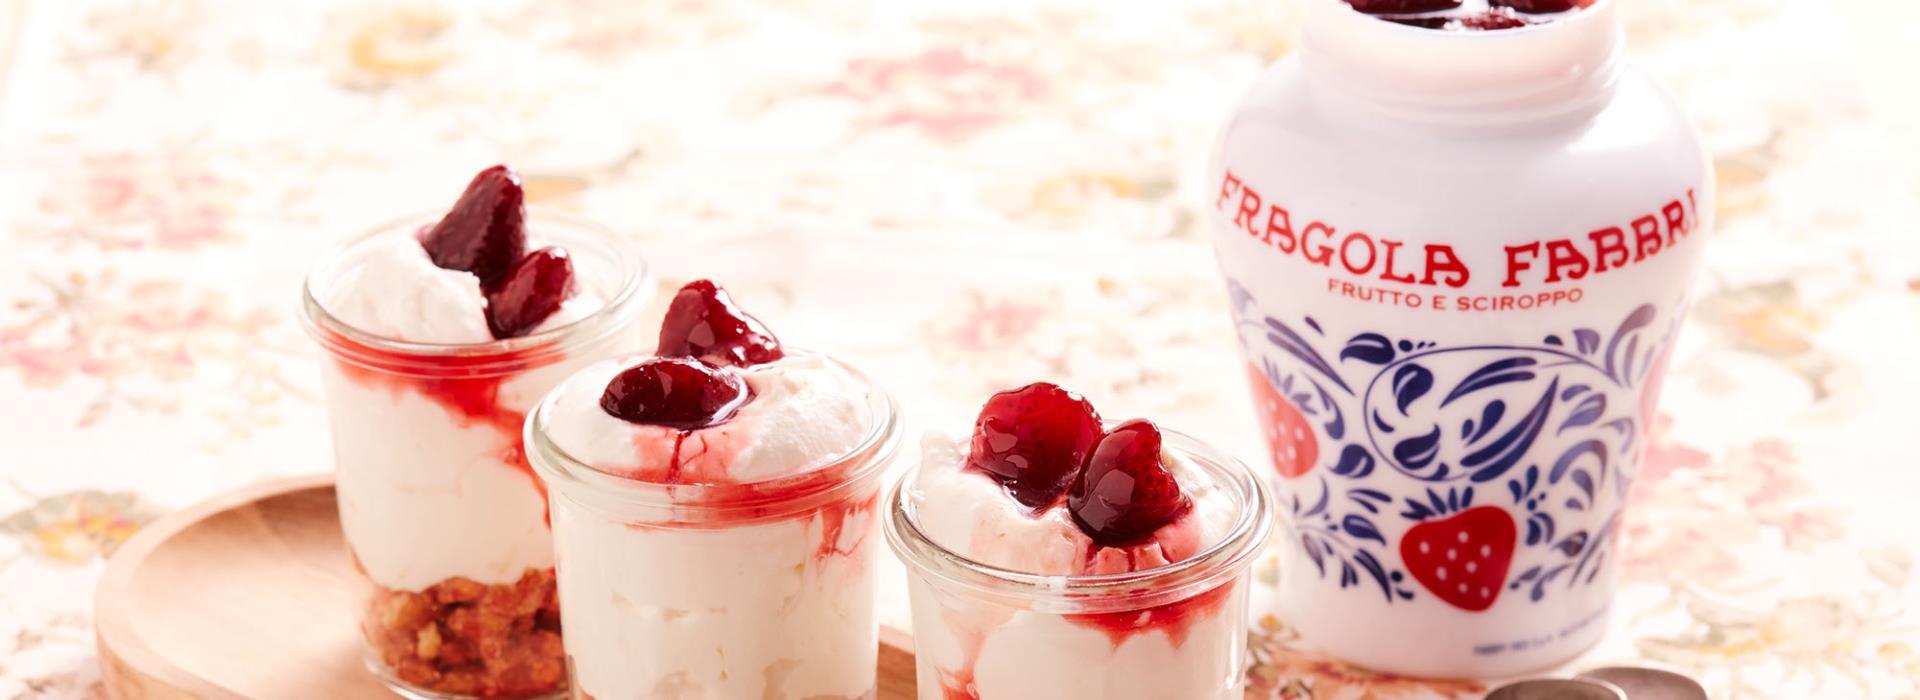 Can a single ingredient transform a recipe? We belive so. Try the mousse with ricotta and Fragola Fabbri.